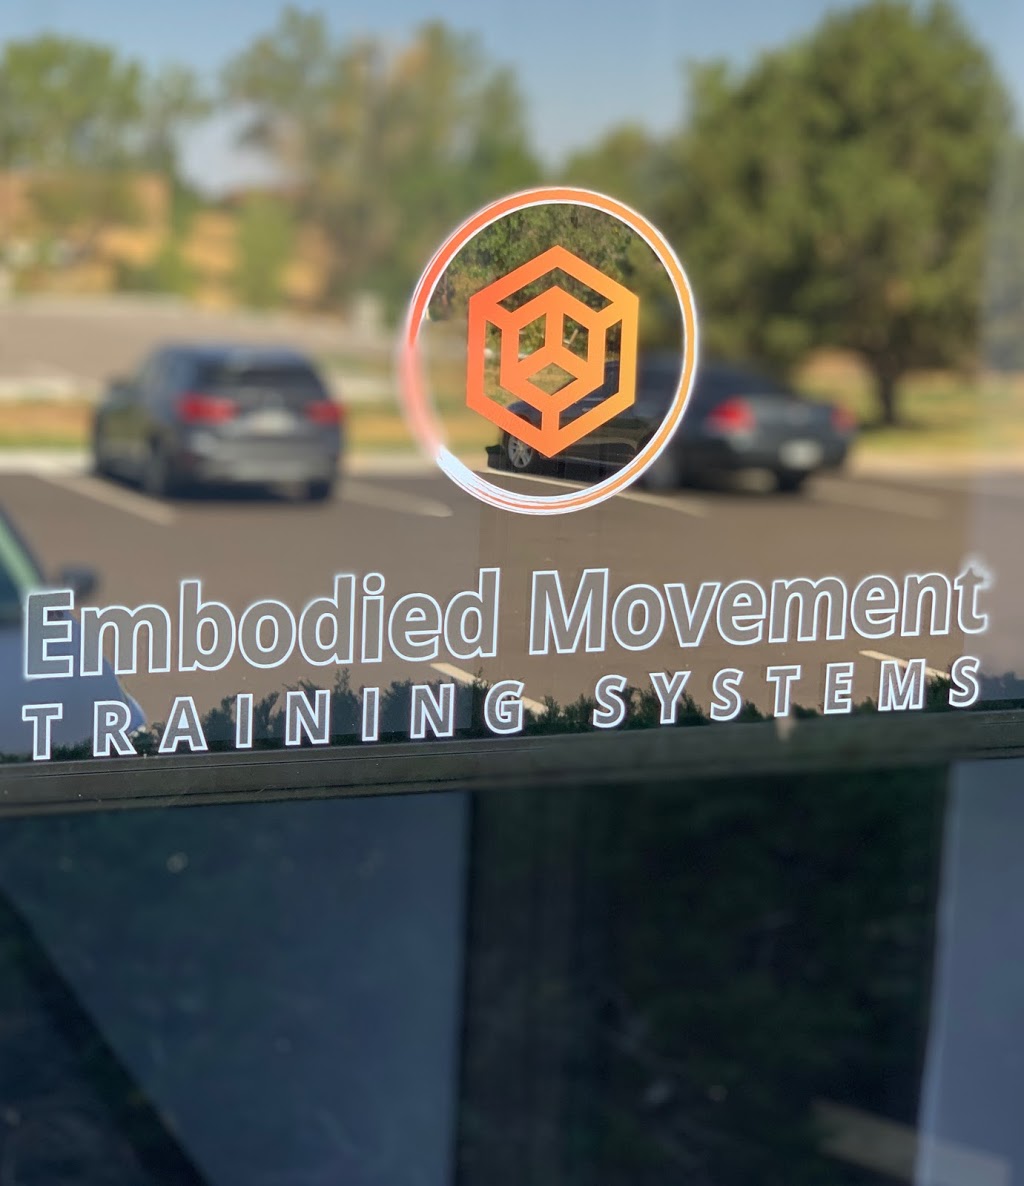 Embodied Movement Training Systems, LLC | 7399 S Tucson Way Unit C-2, Centennial, CO 80112 | Phone: (720) 491-1570